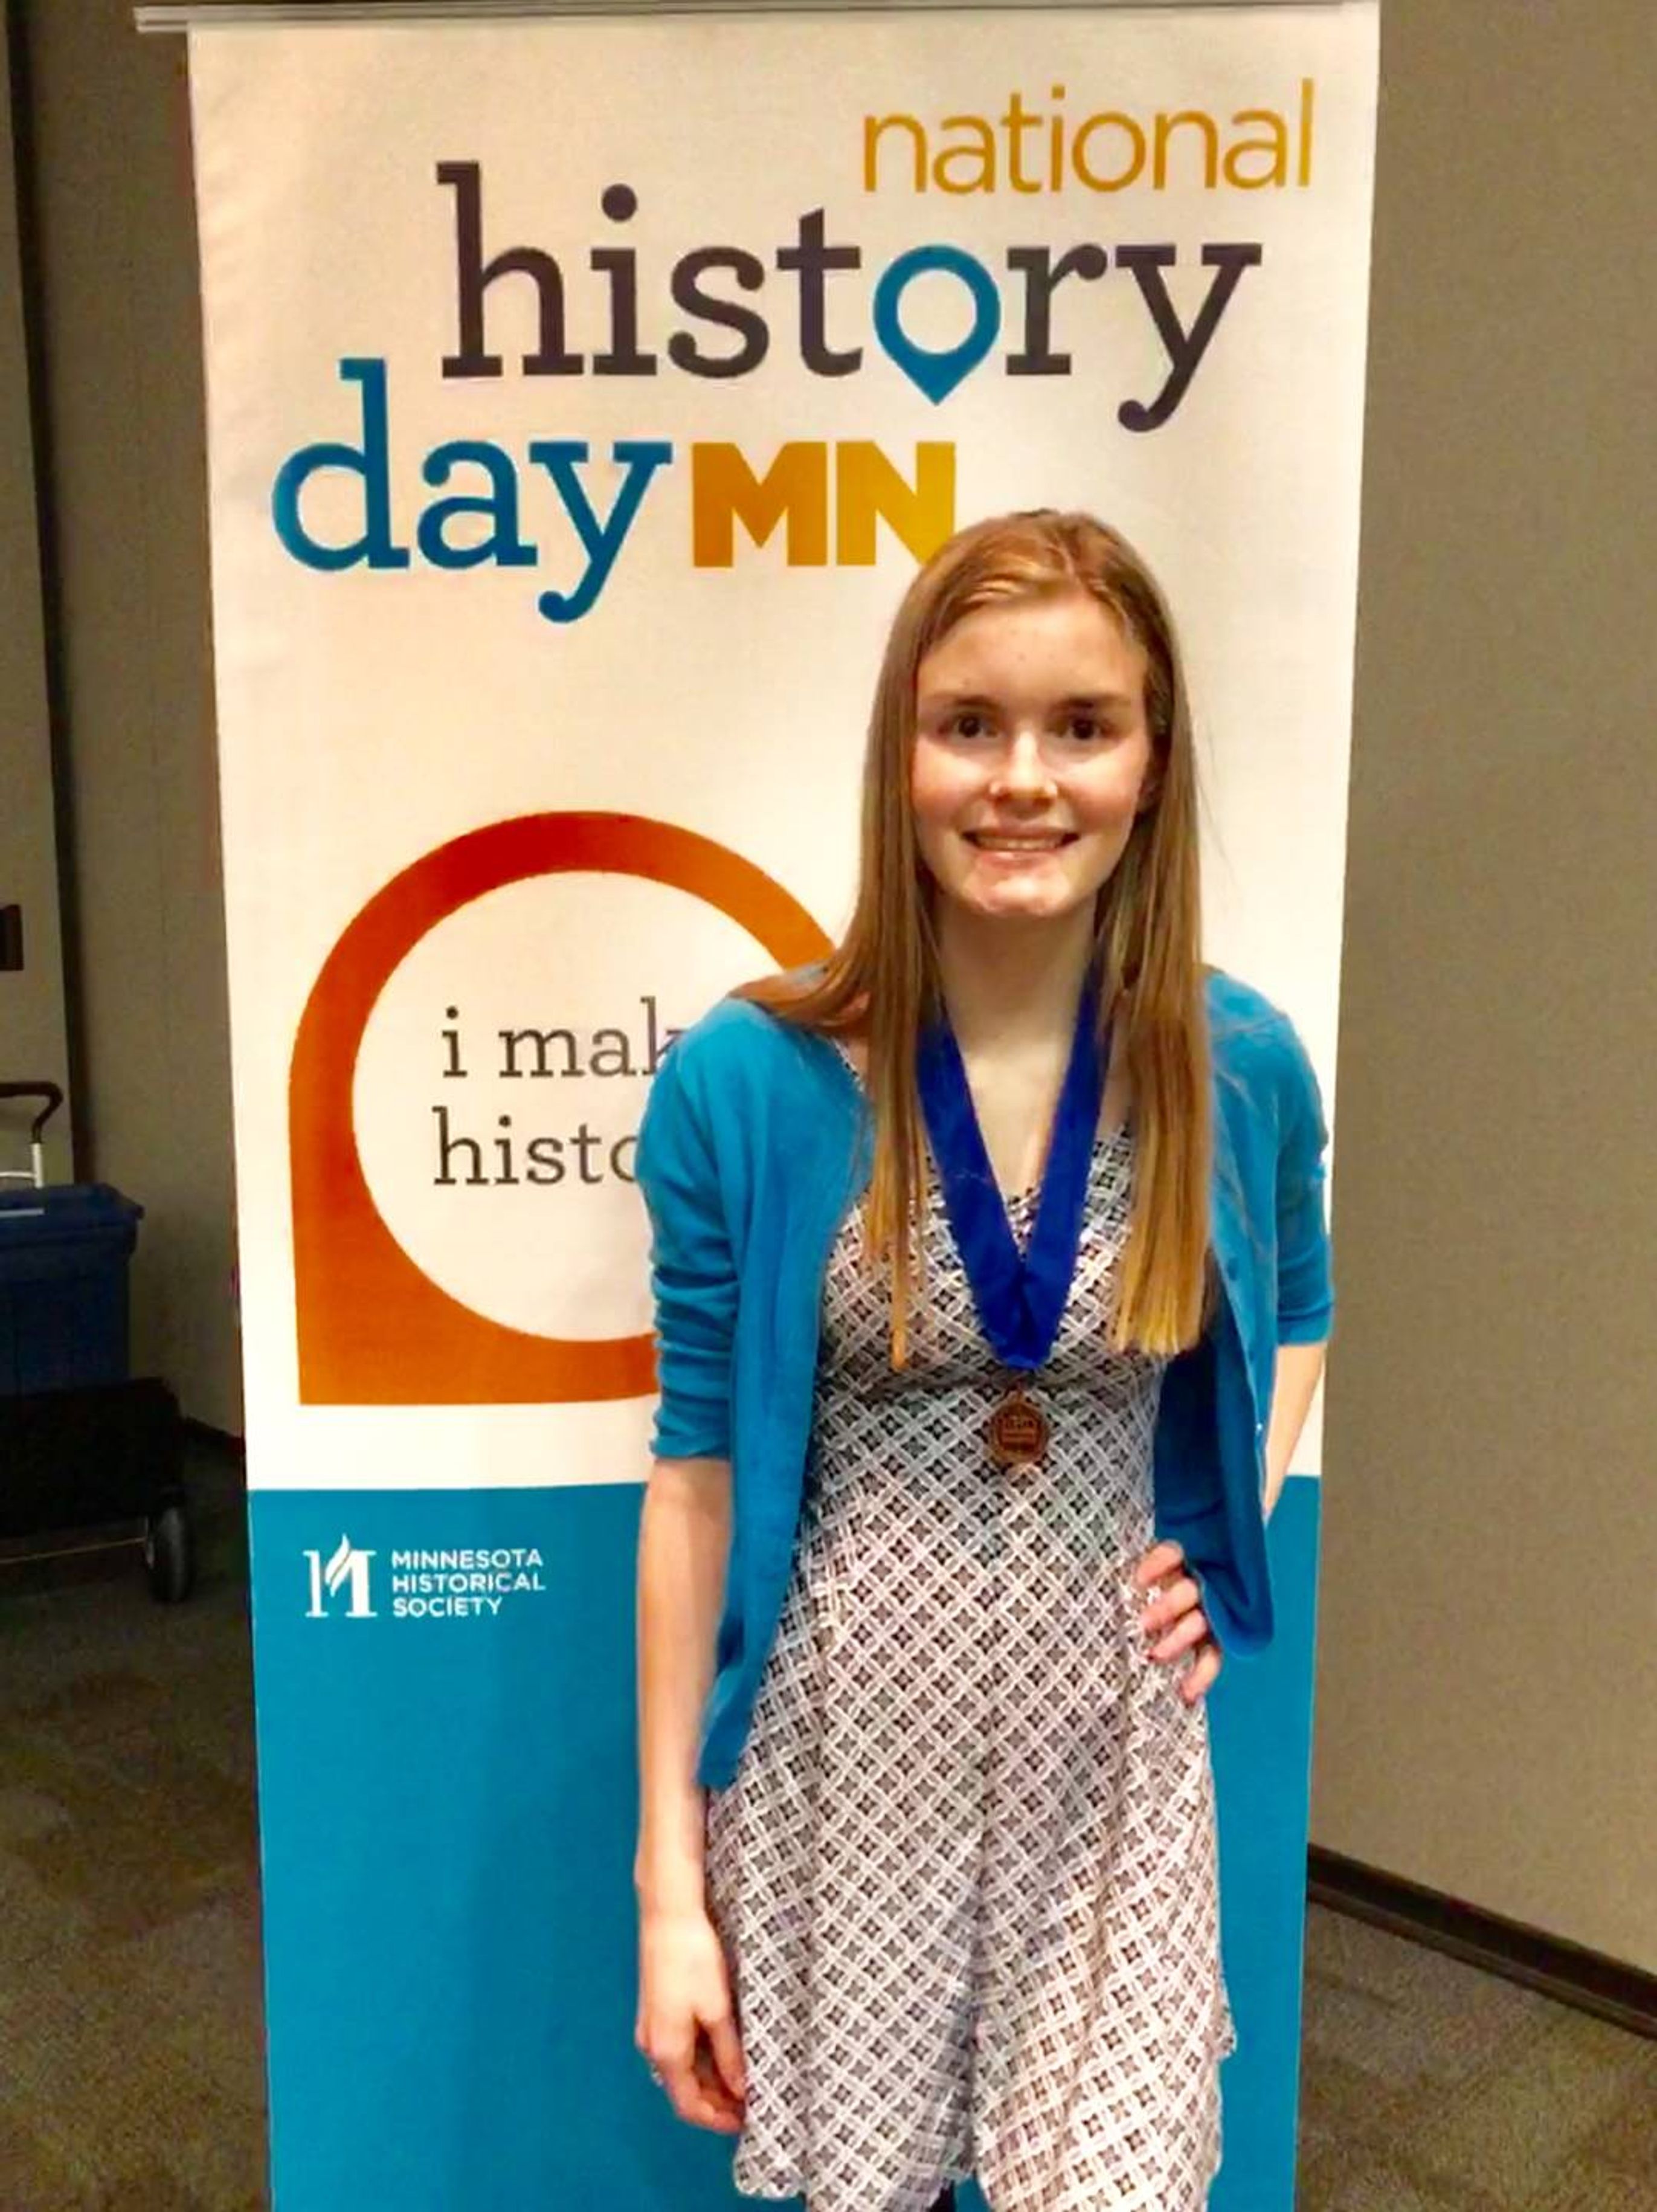 Bryn Hansen at the National History Day MN event.